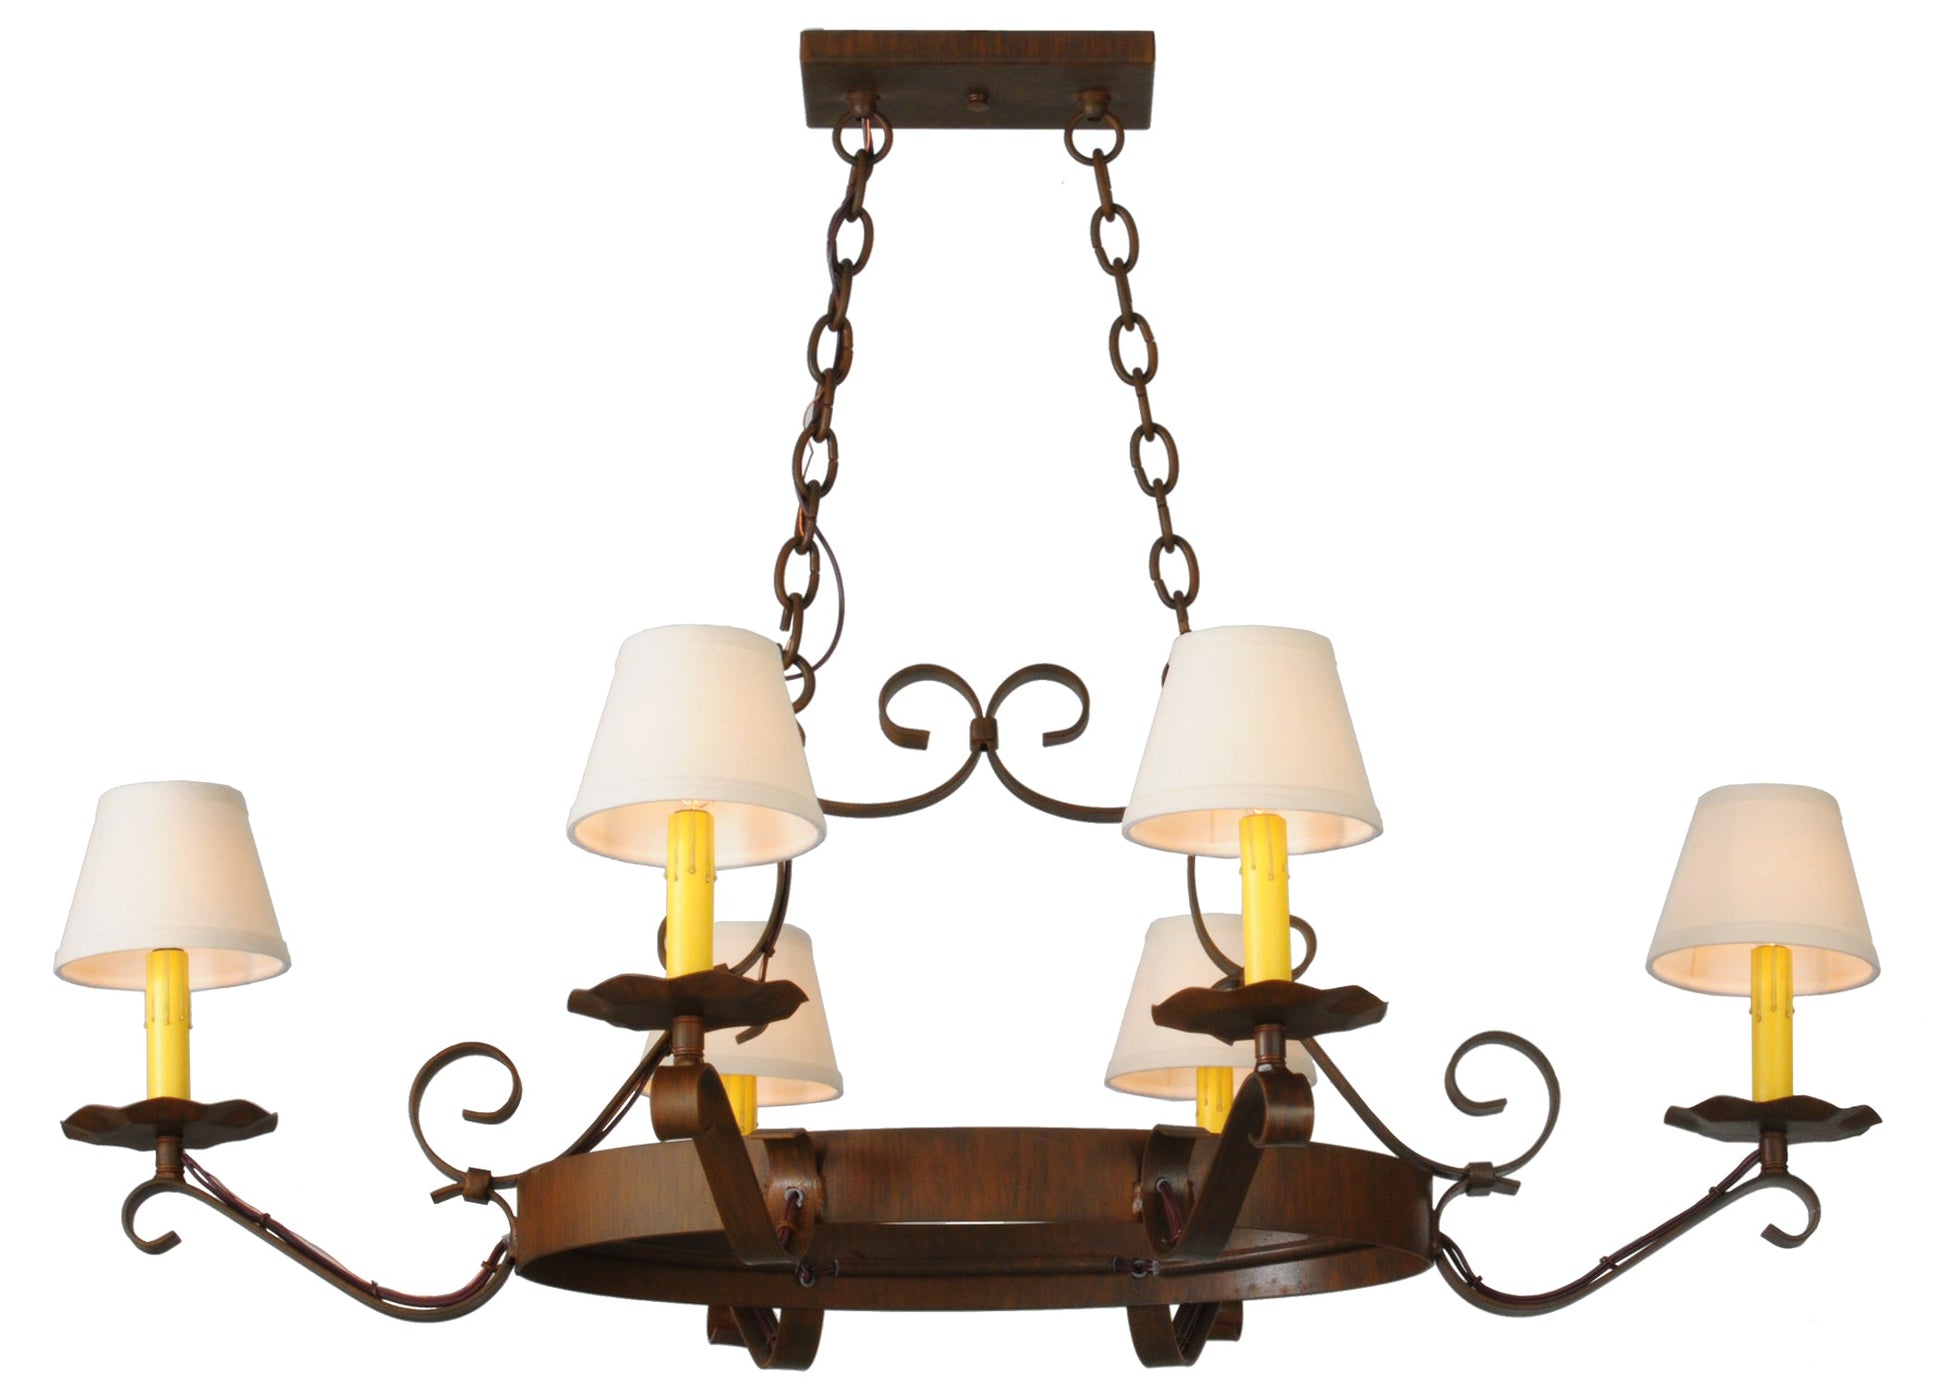 40" Handforged Oval 6-Light Chandelier by 2nd Ave Lighting